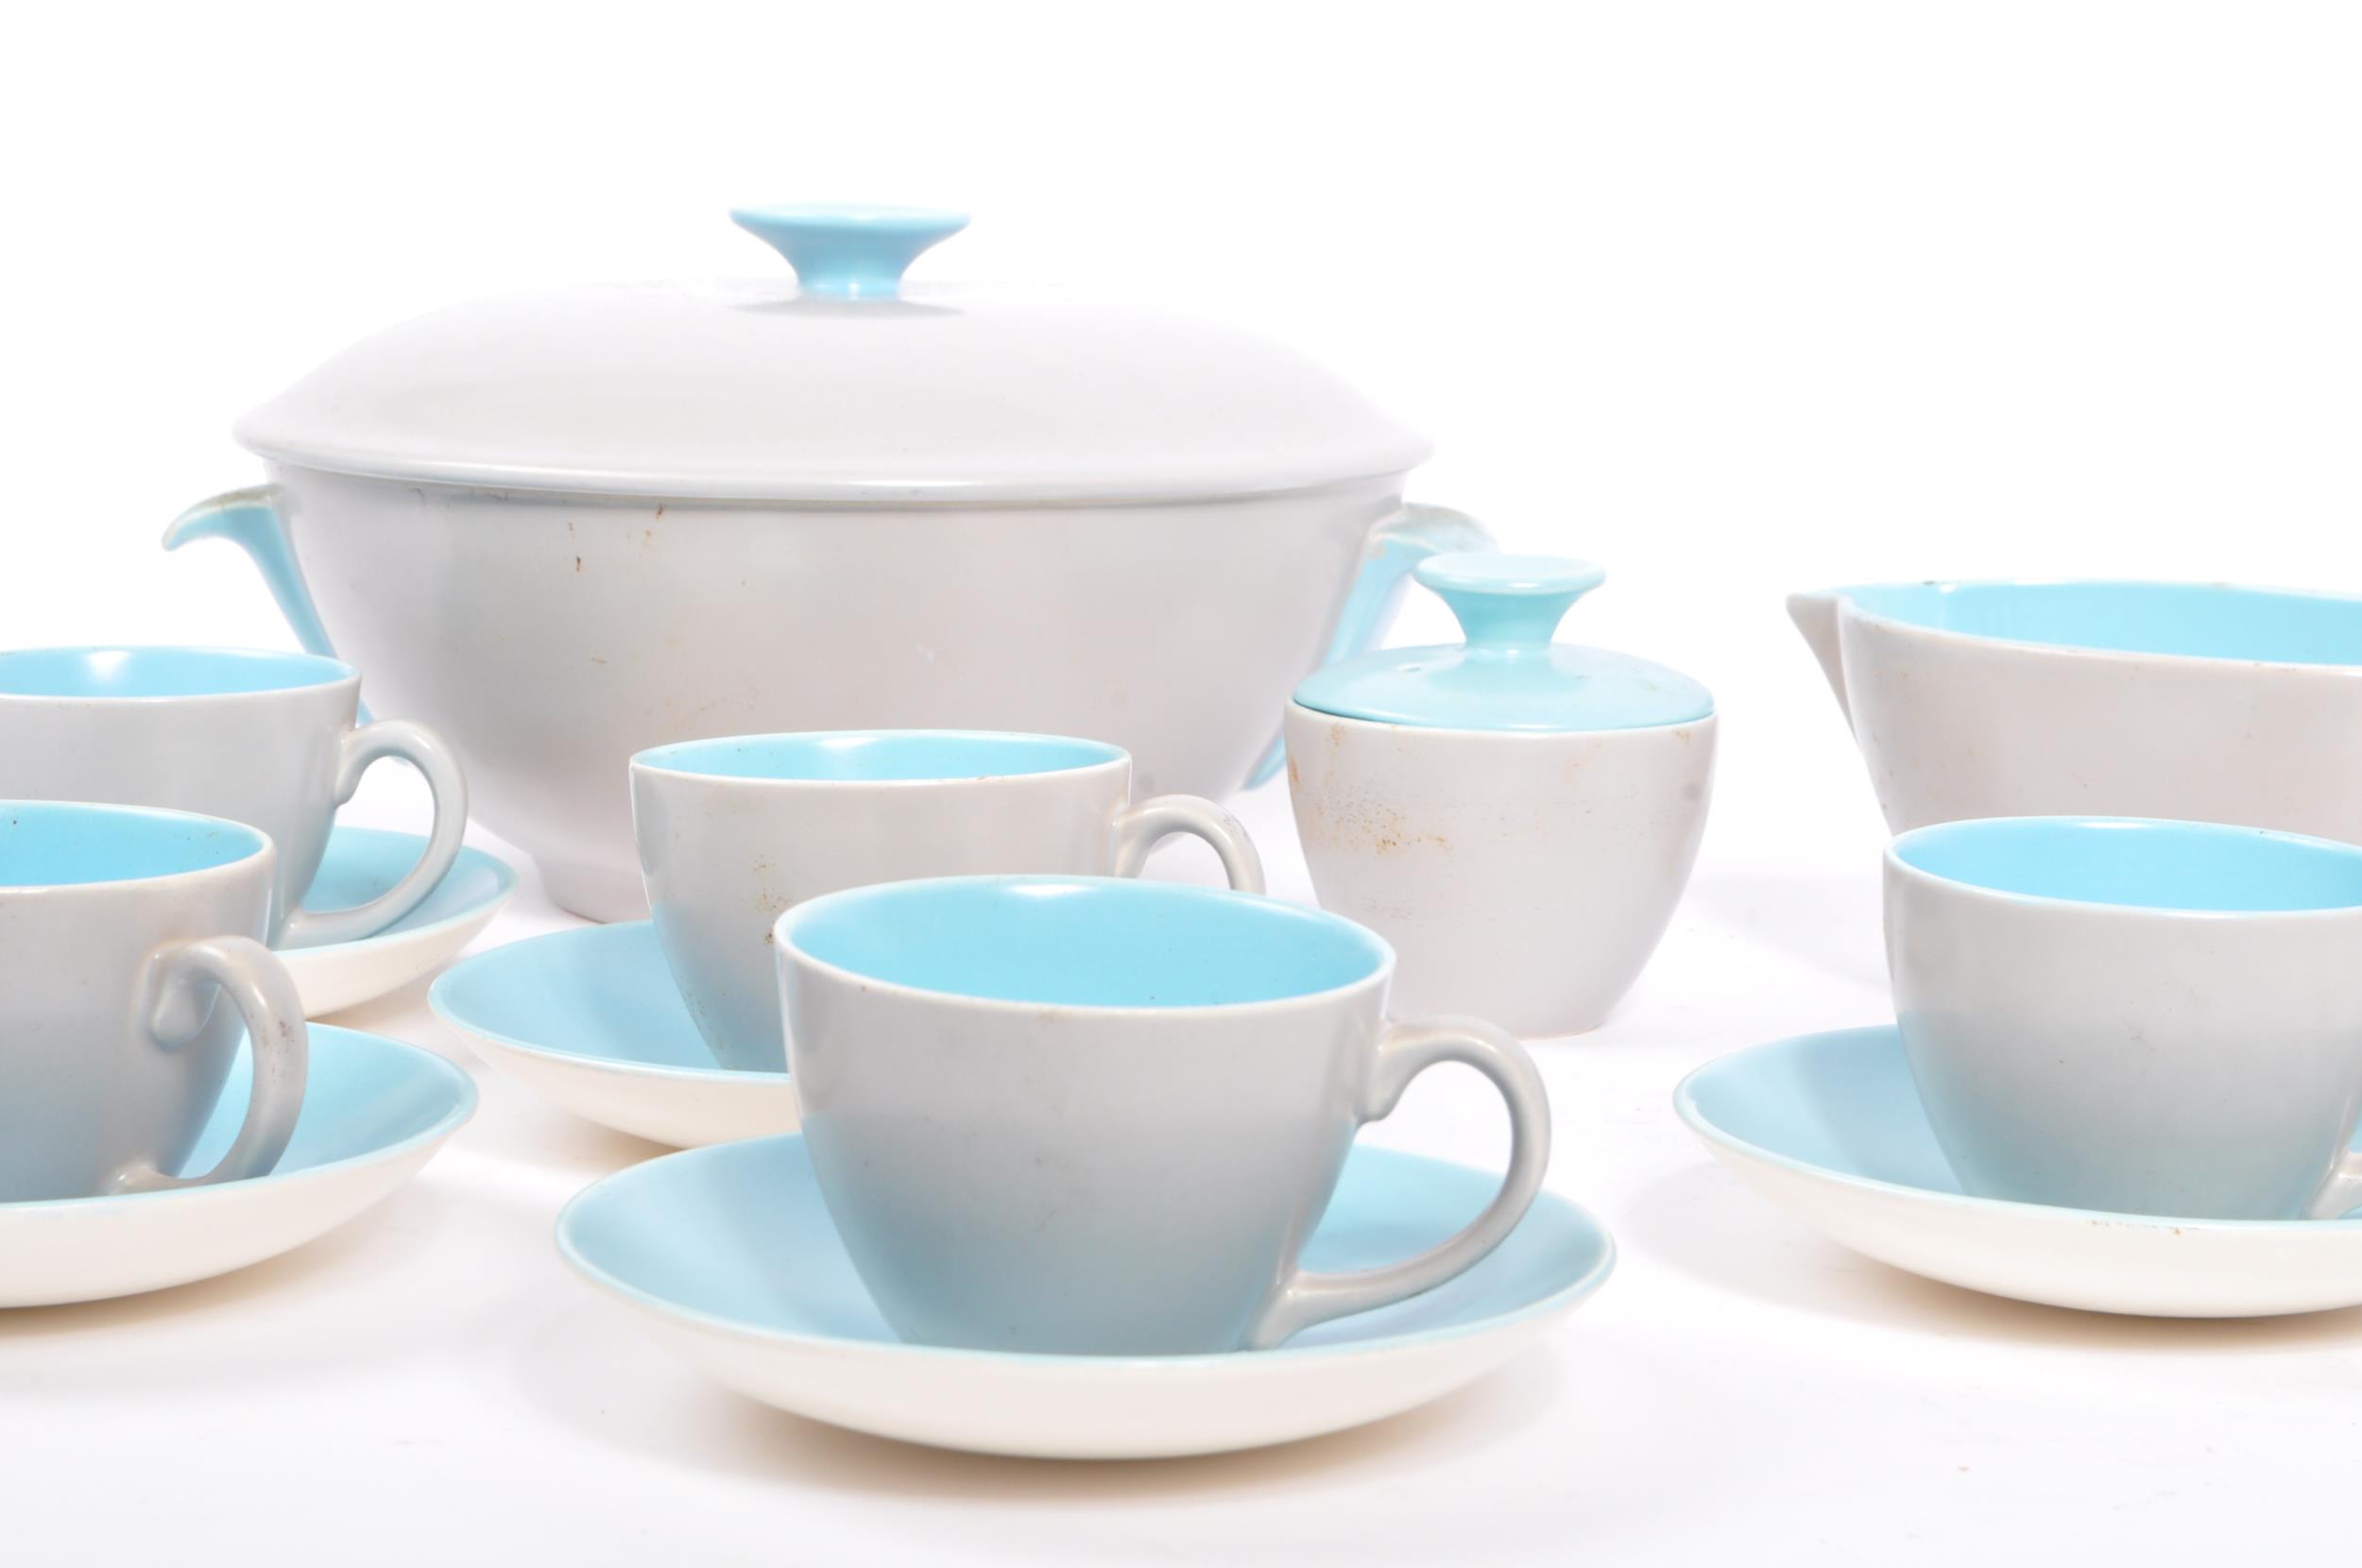 VINTAGE GREY & SKY BLUE TWINTONE SERVICE BY POOLE POTTERY - Image 2 of 8